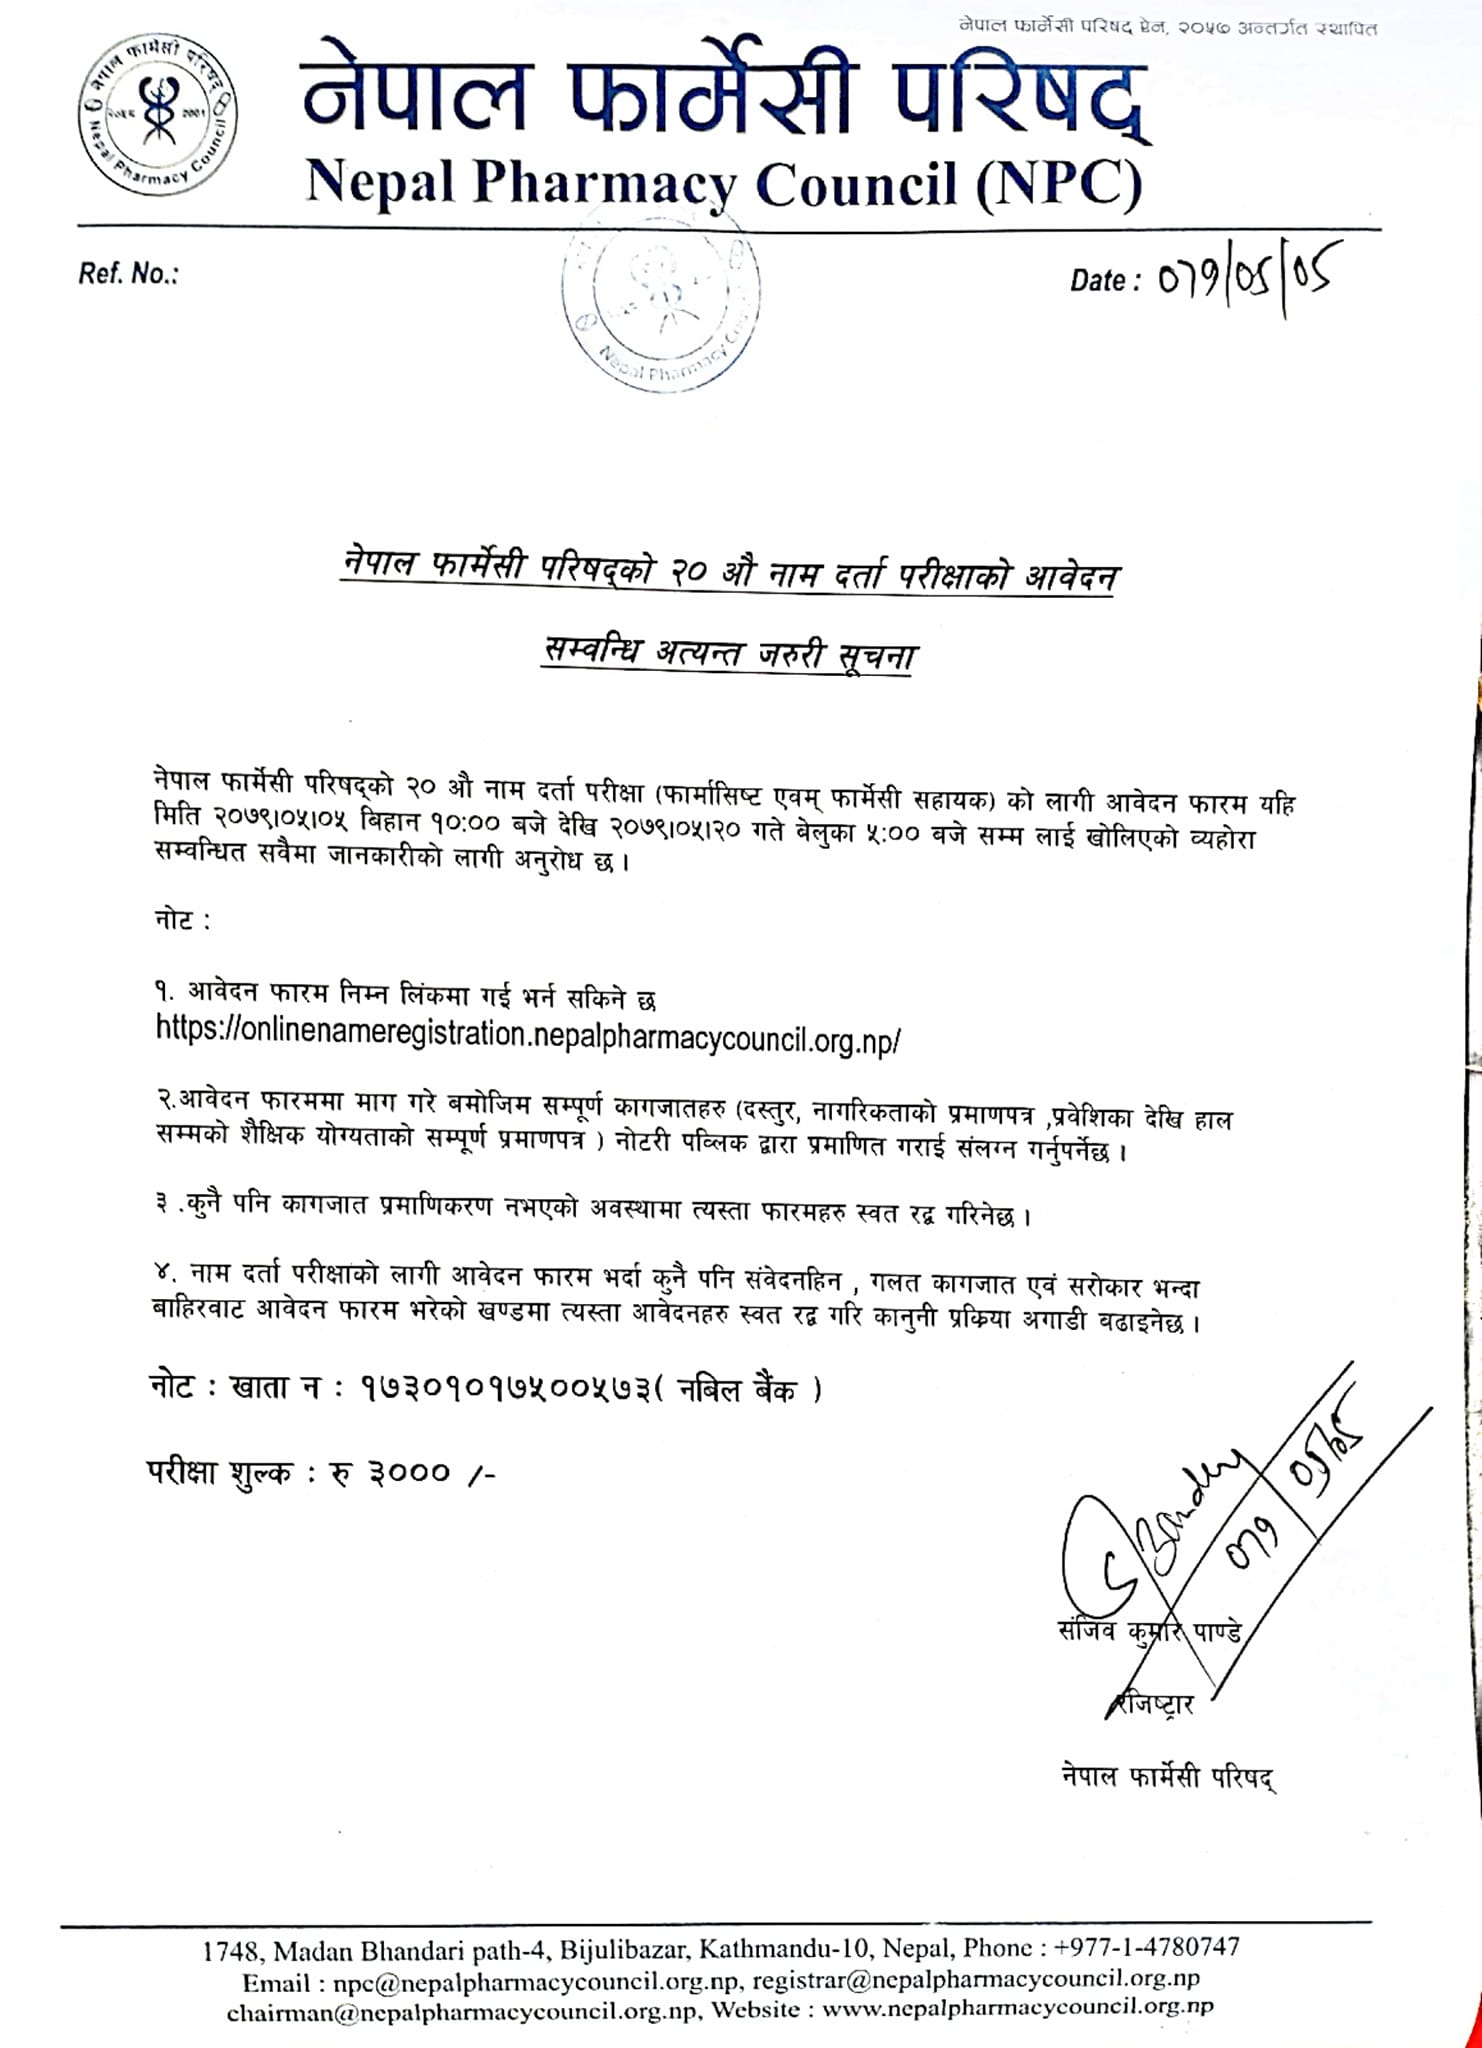 Nepal Pharmacy Council 20th Name Registration Exam Application Form Notice